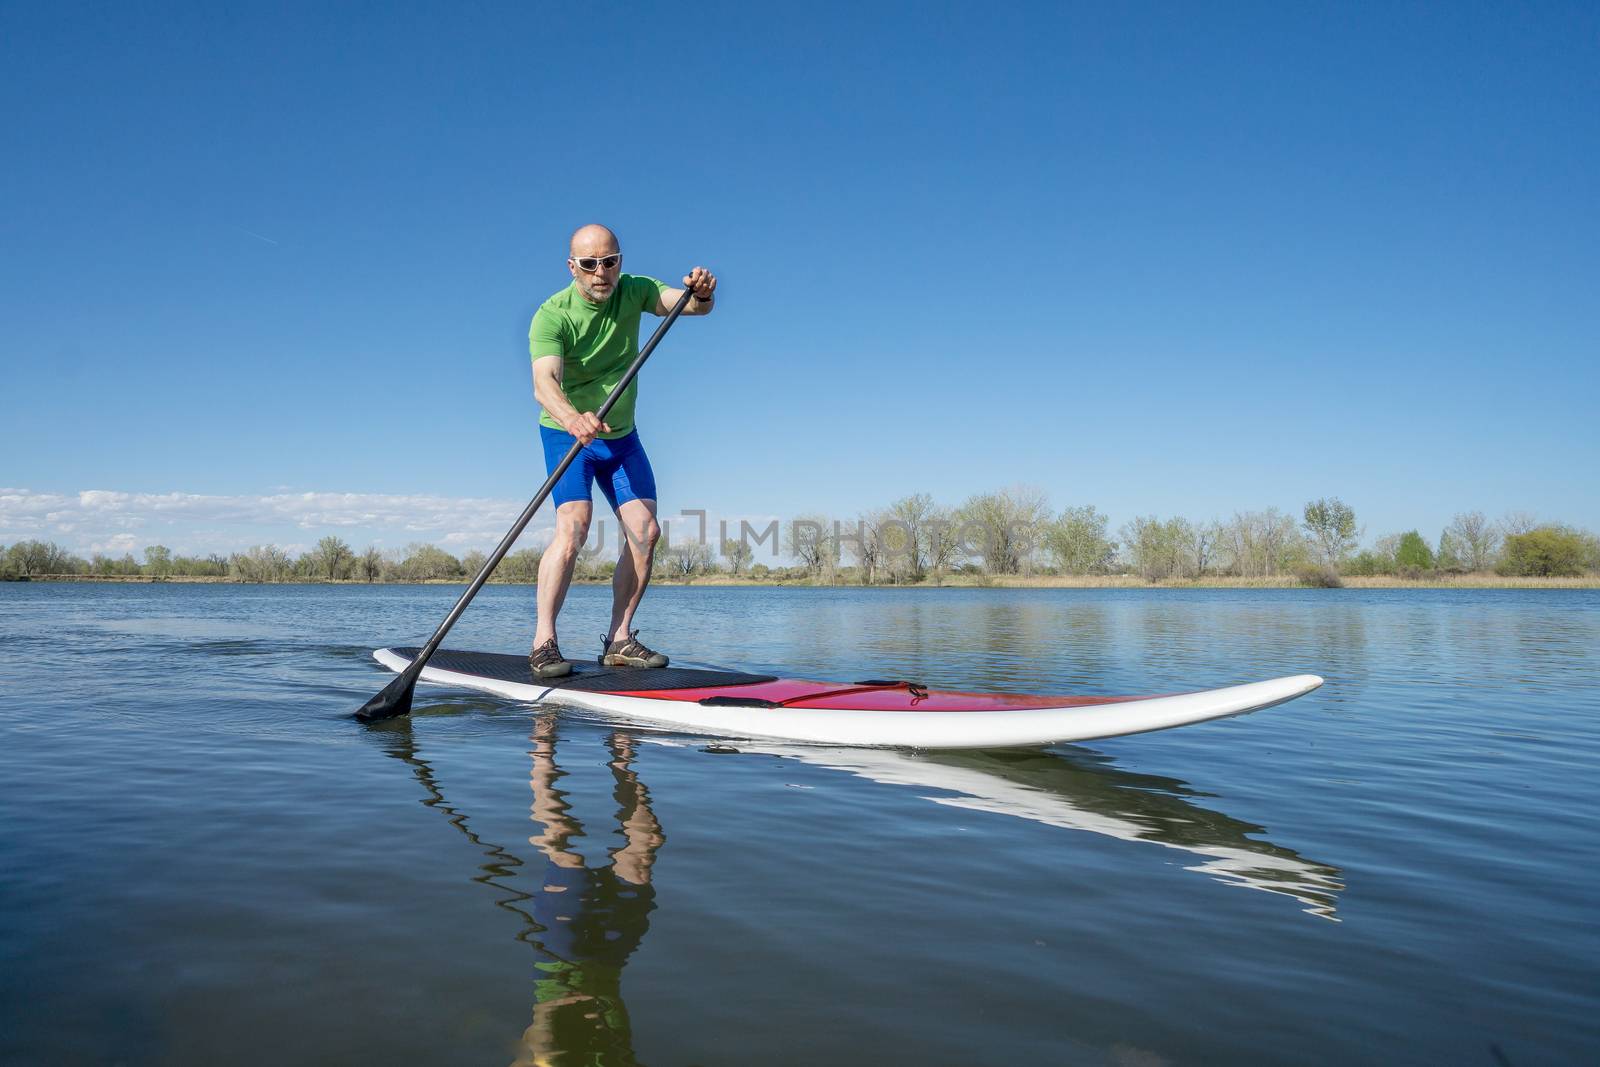 stand up paddleboard workout by PixelsAway